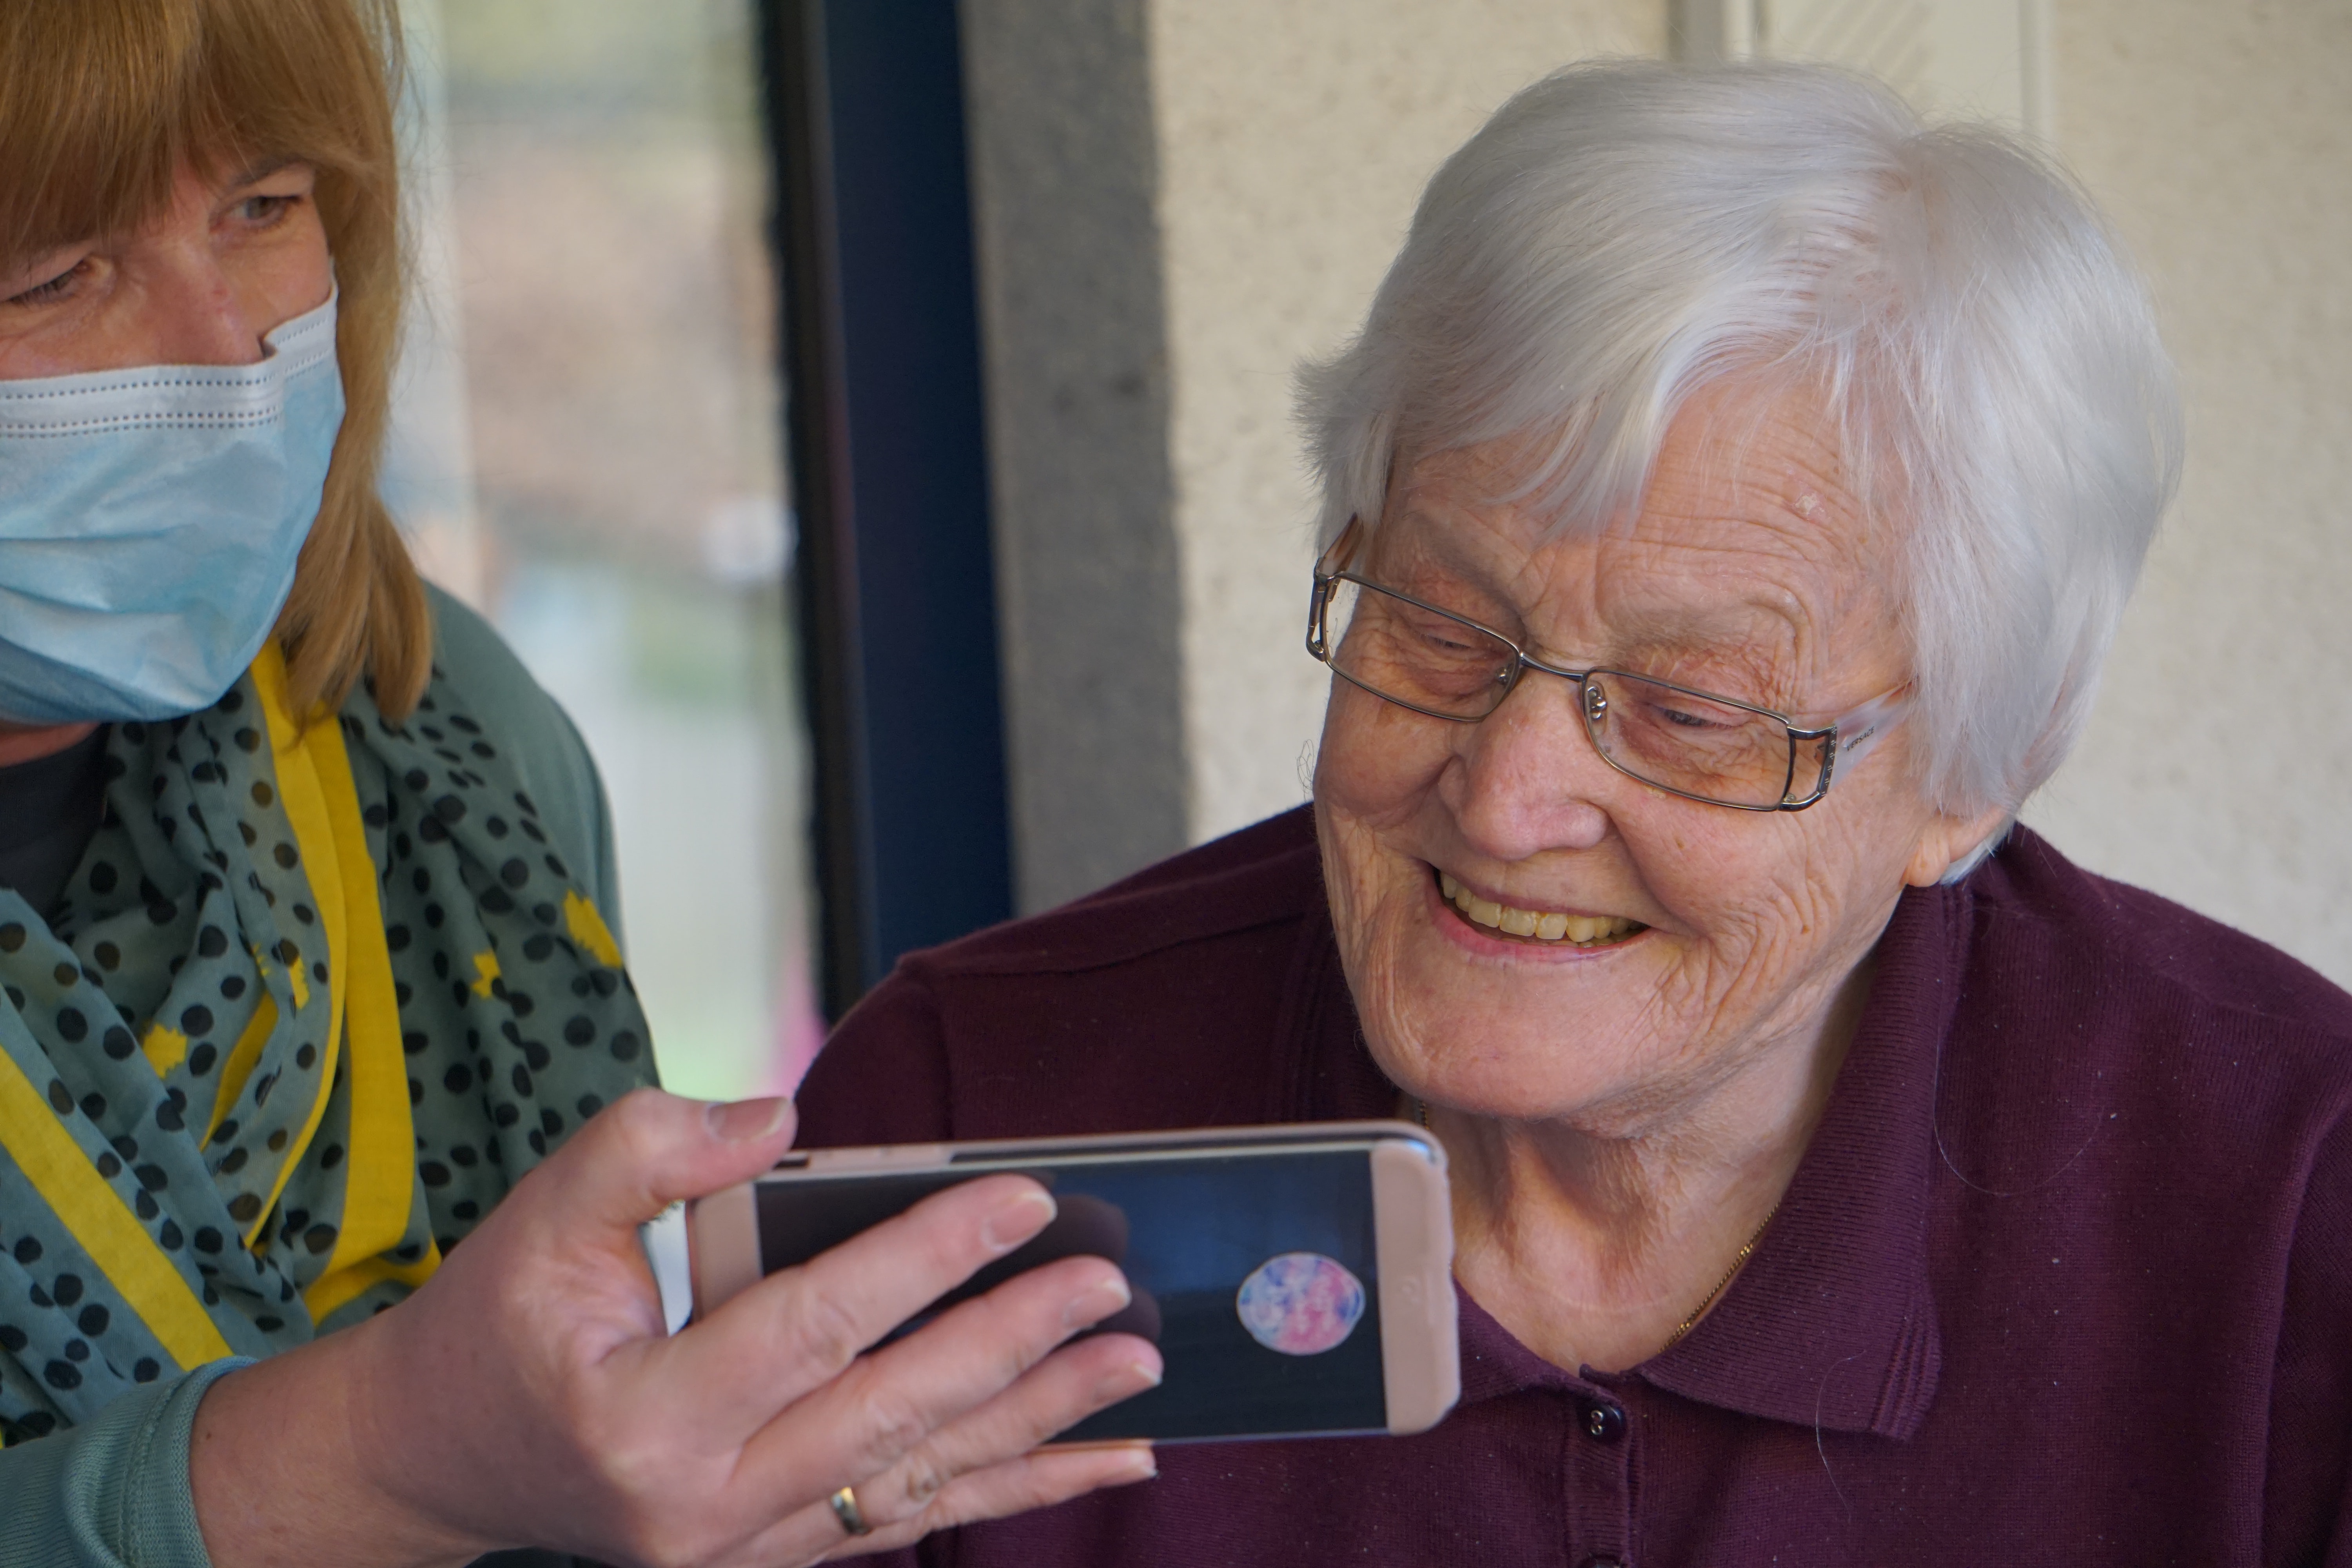 Social care professional with woman looking at a phone